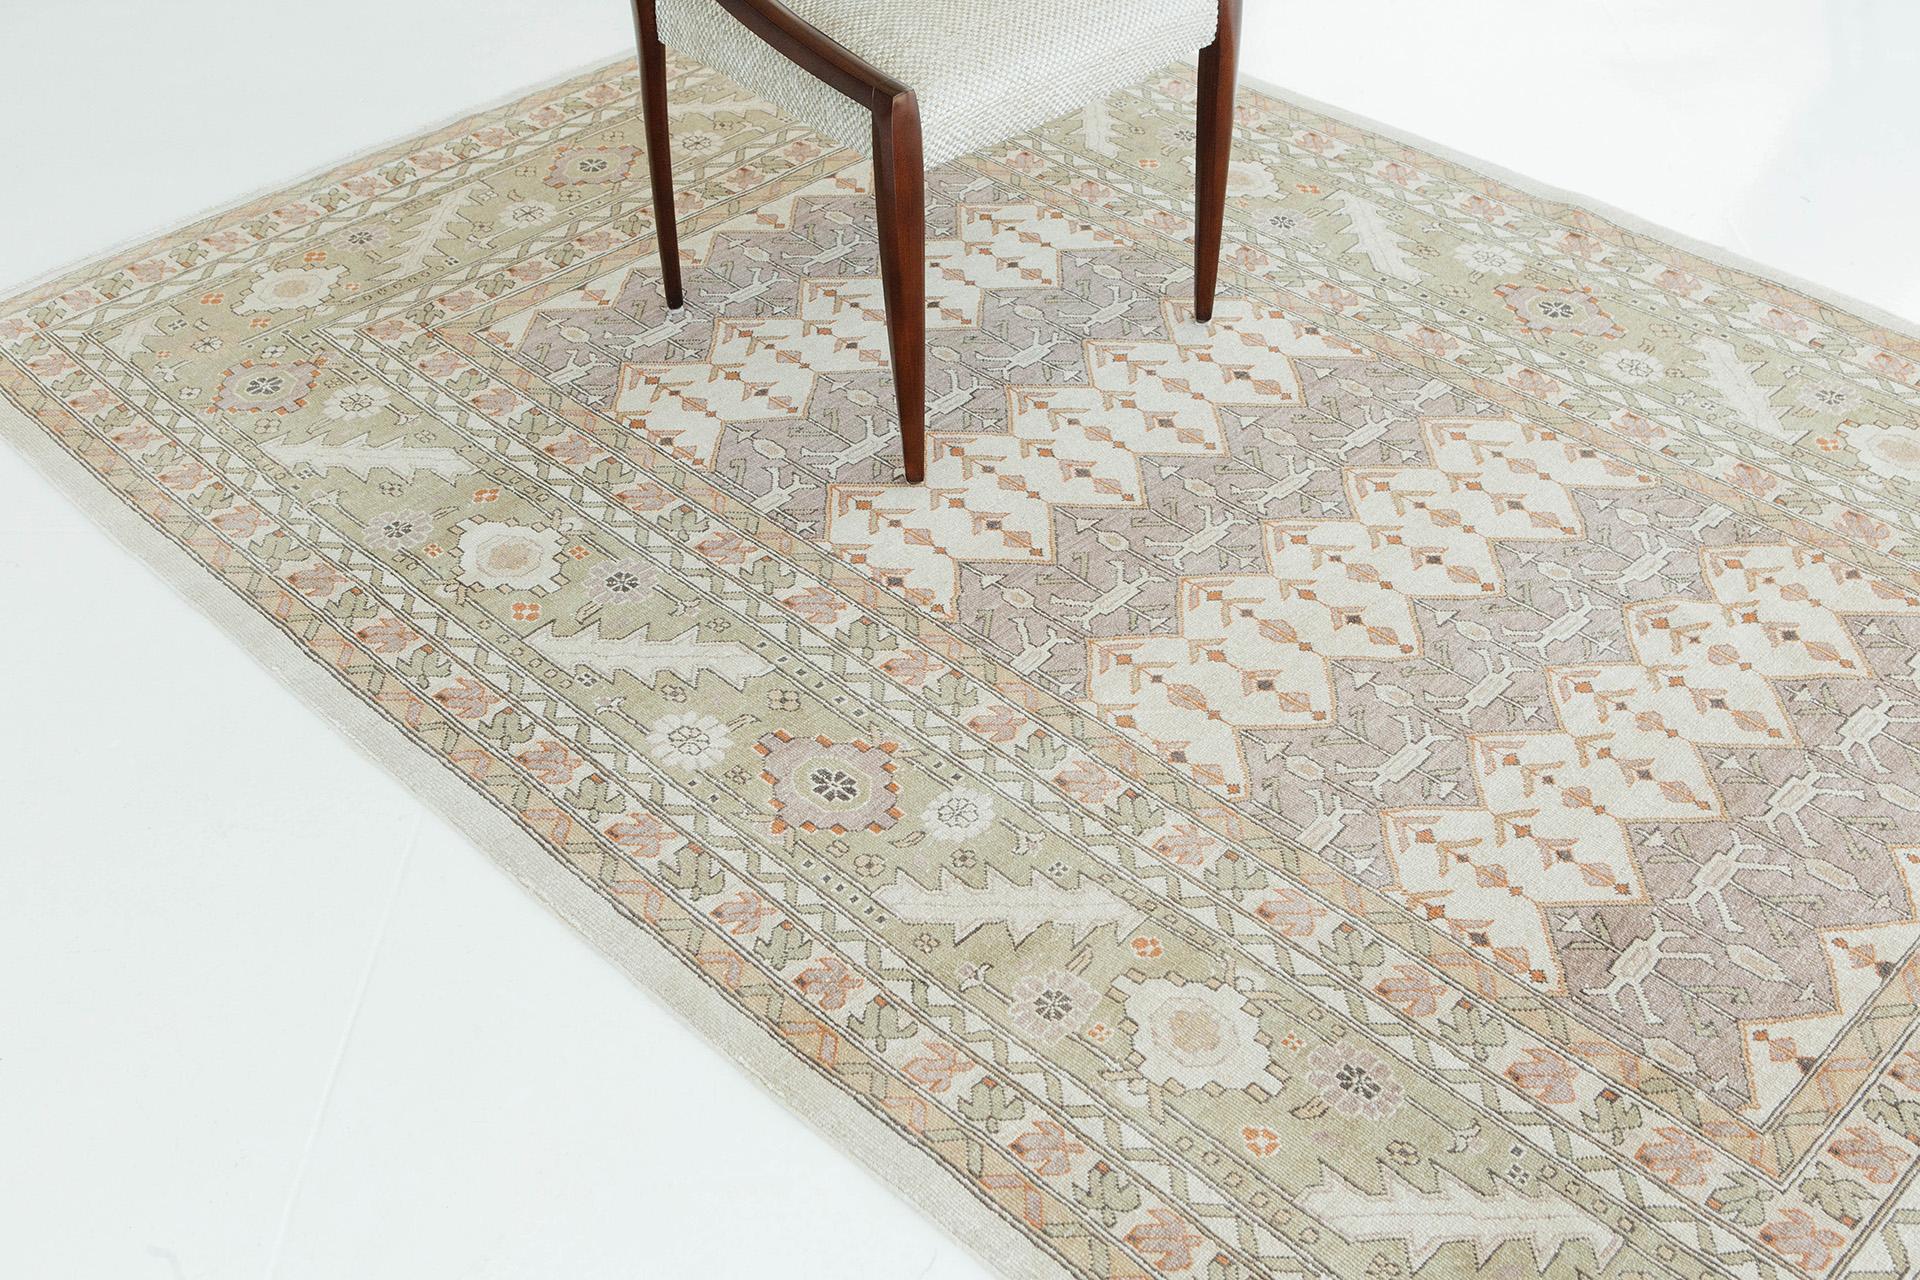 This Bakhtiari's panel design brings a touch of paradise into your home. The natural dyed colors of khaki, liver chestnut, and shadow green provide a feeling of comfort in your eyes. The rug's sophisticated pile weave pays homage to the field